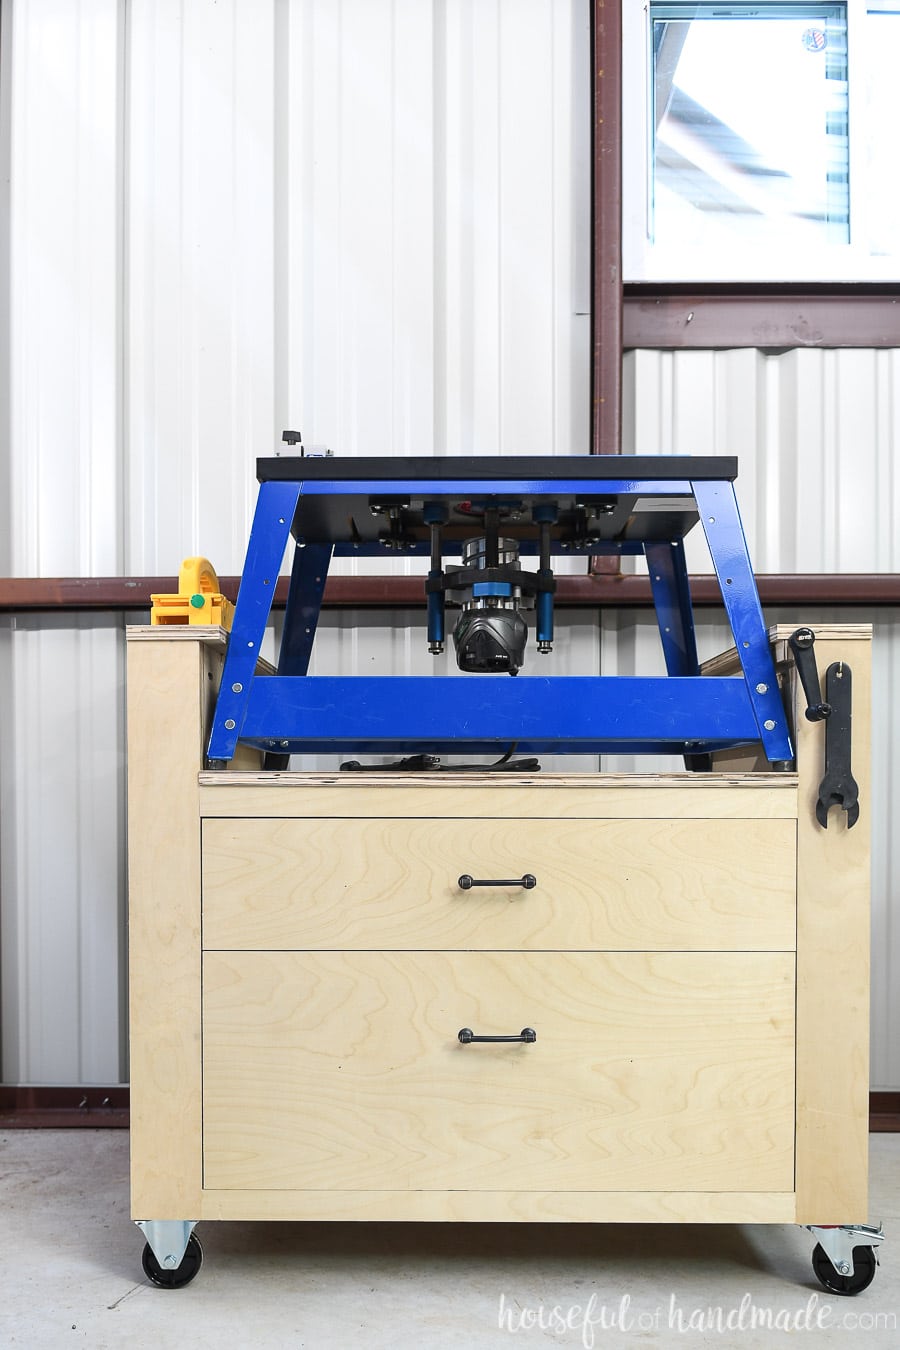 Rolling Bench Top Router Table Build Plans - Houseful of 